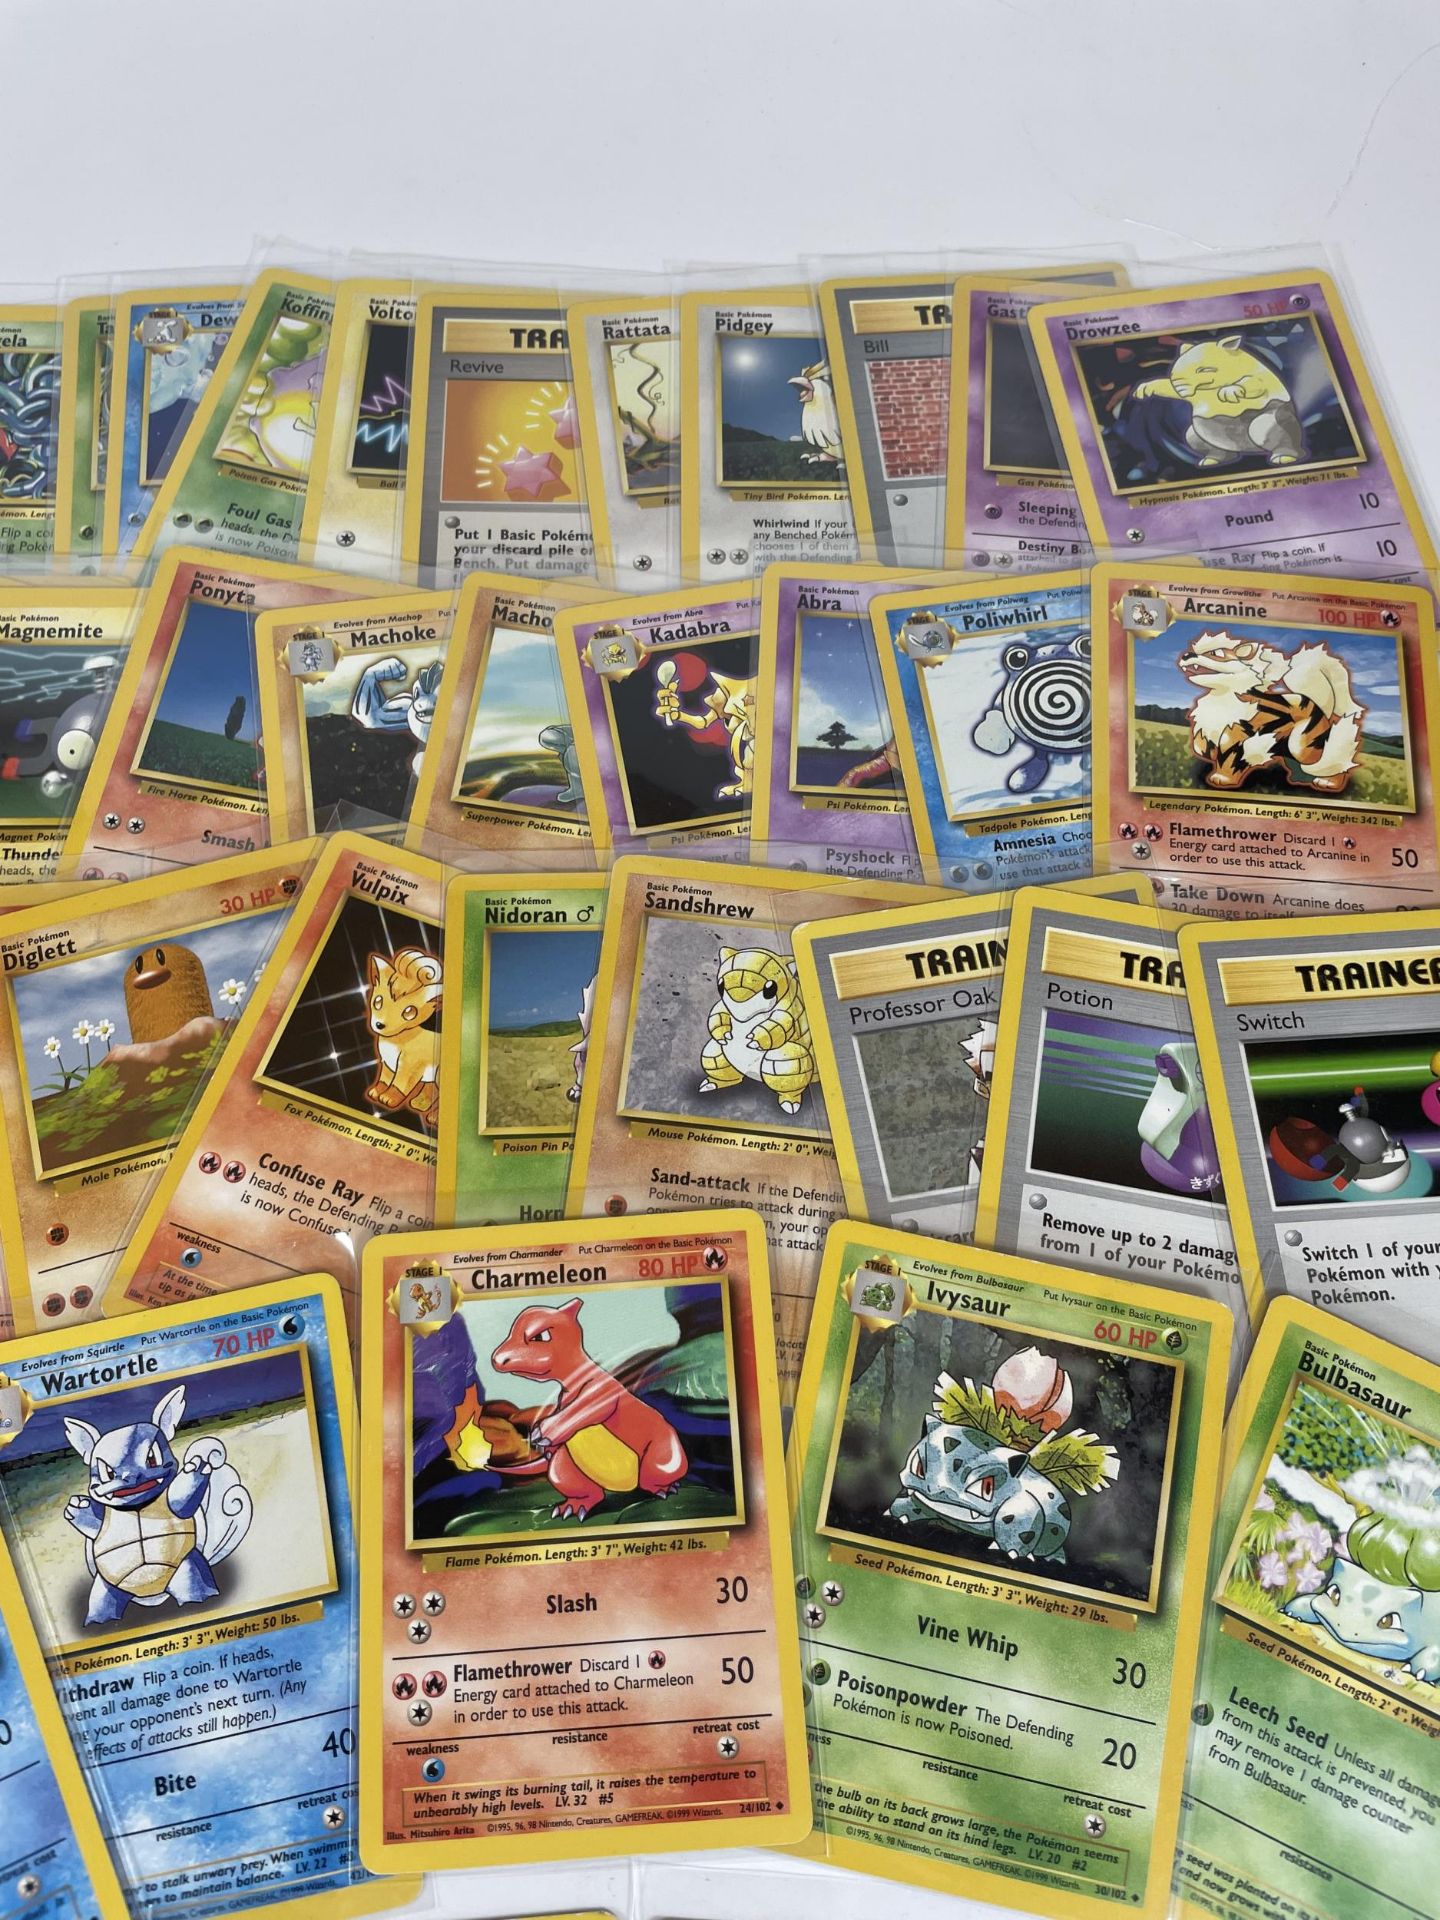 A COLLECTION OF WOTC 1999 BASE SET POKEMON CARDS, SHADOWLESS, SQUIRTLE, BULBSAUR ETC - Image 3 of 7